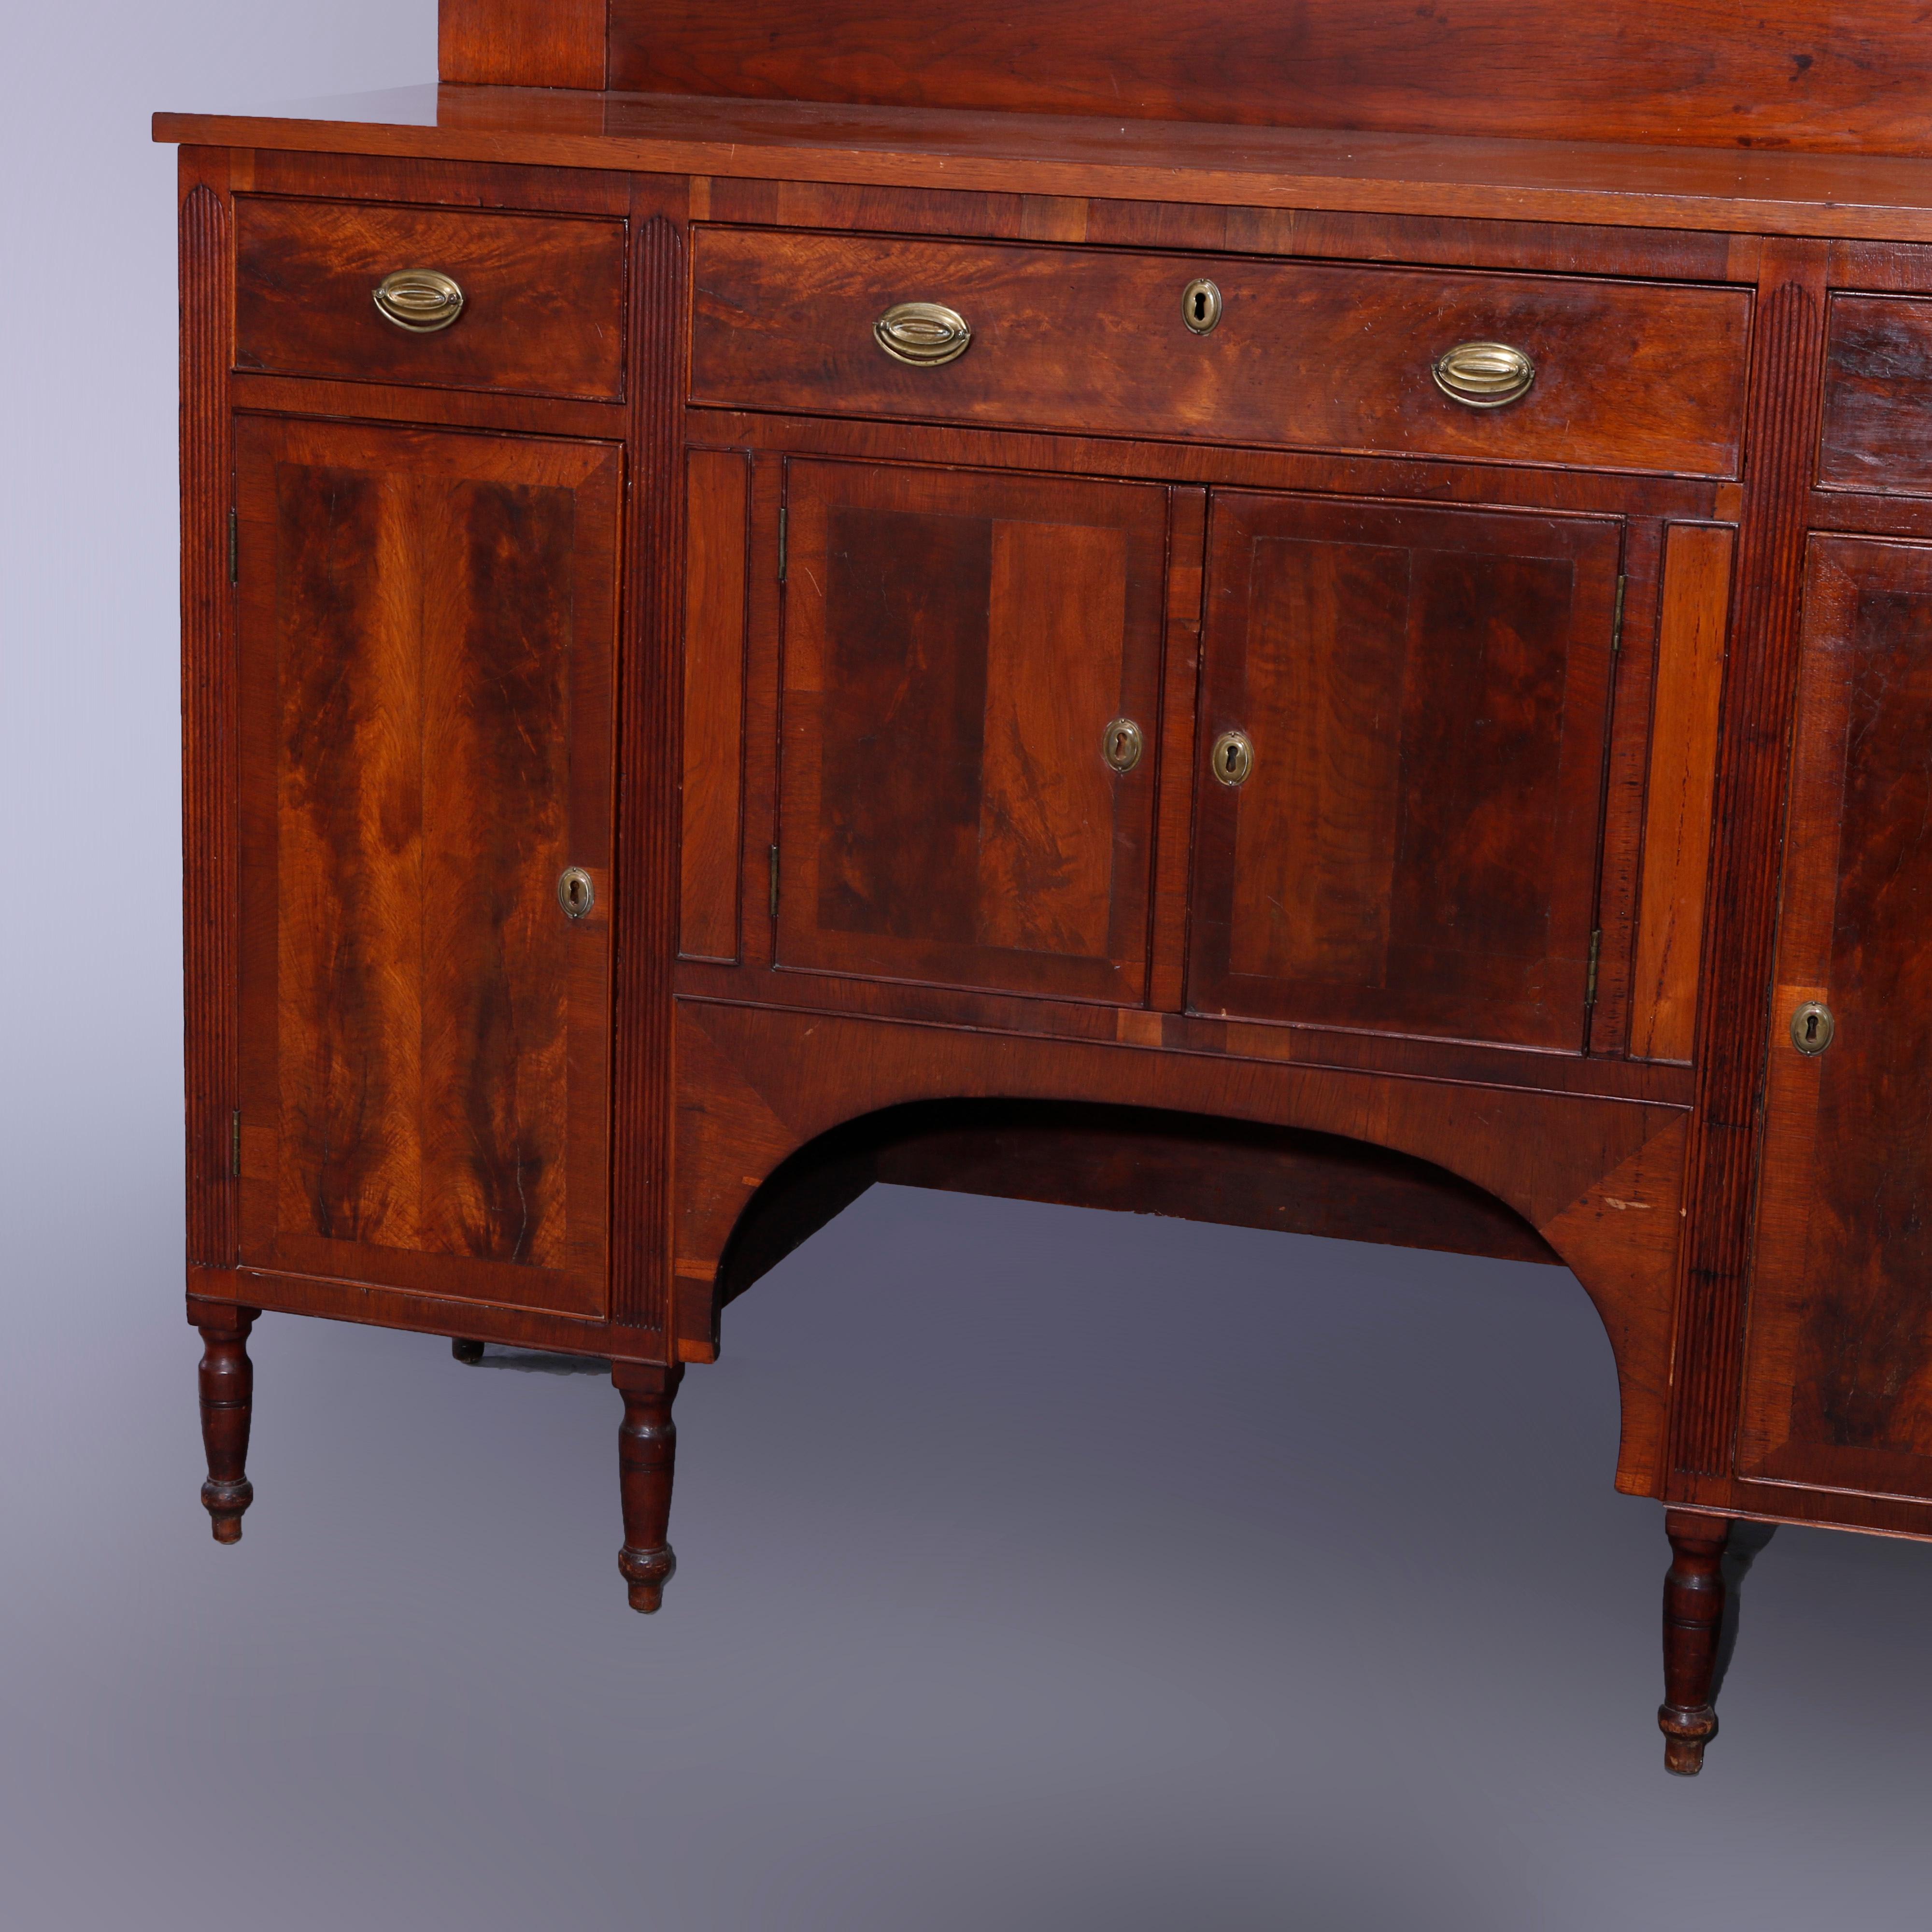 Carved Antique Period Sheraton Flame Mahogany Sideboard, Circa 1830